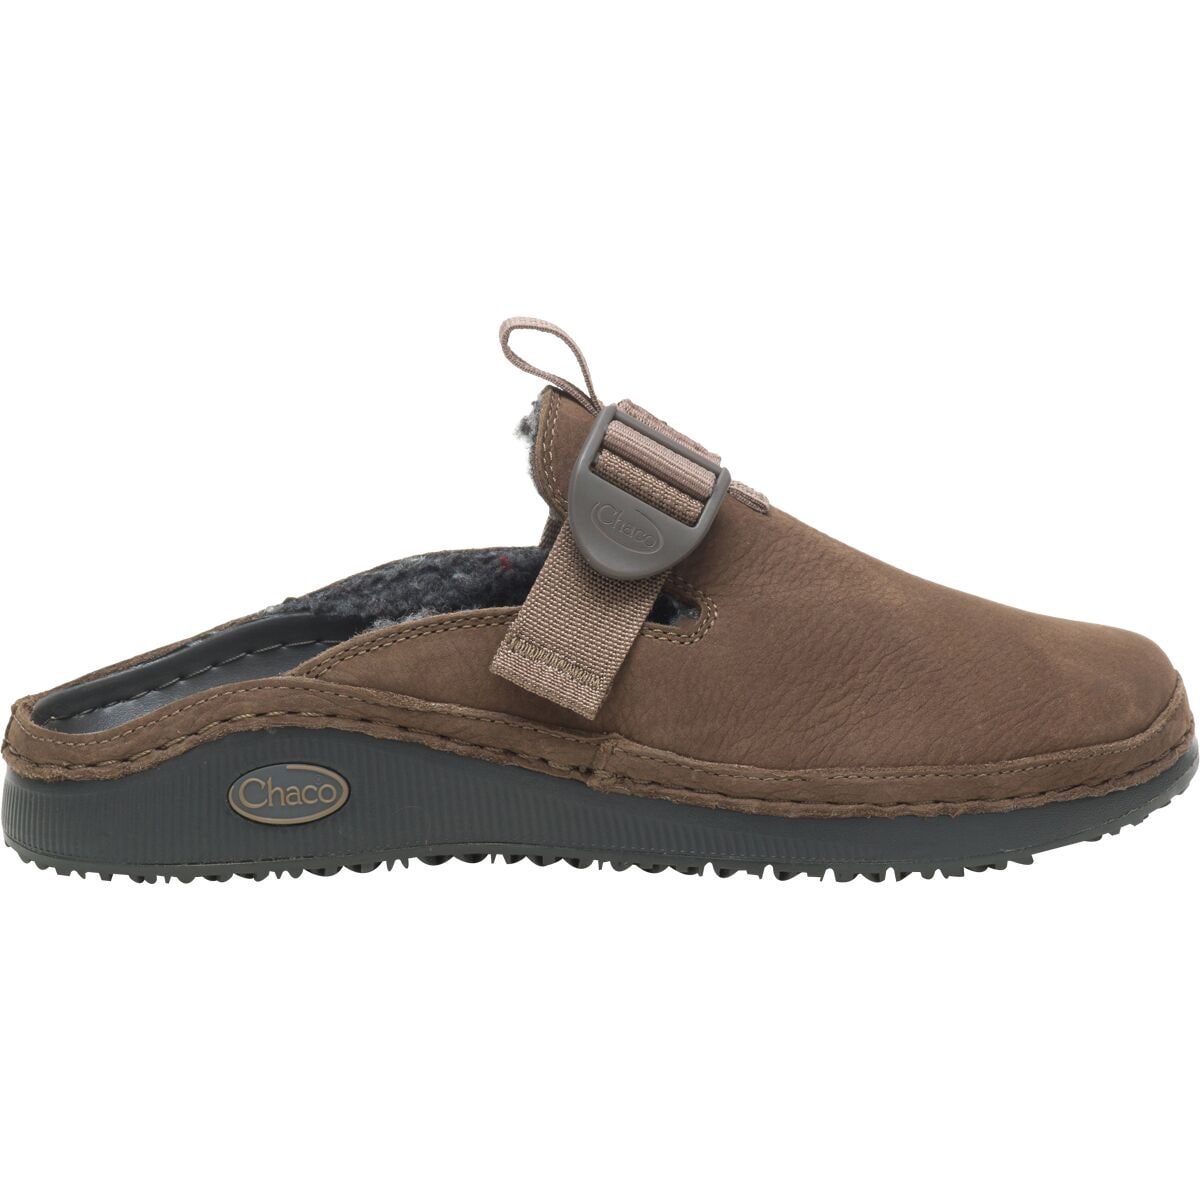 Chaco Paonia Fluff Clog - Women's